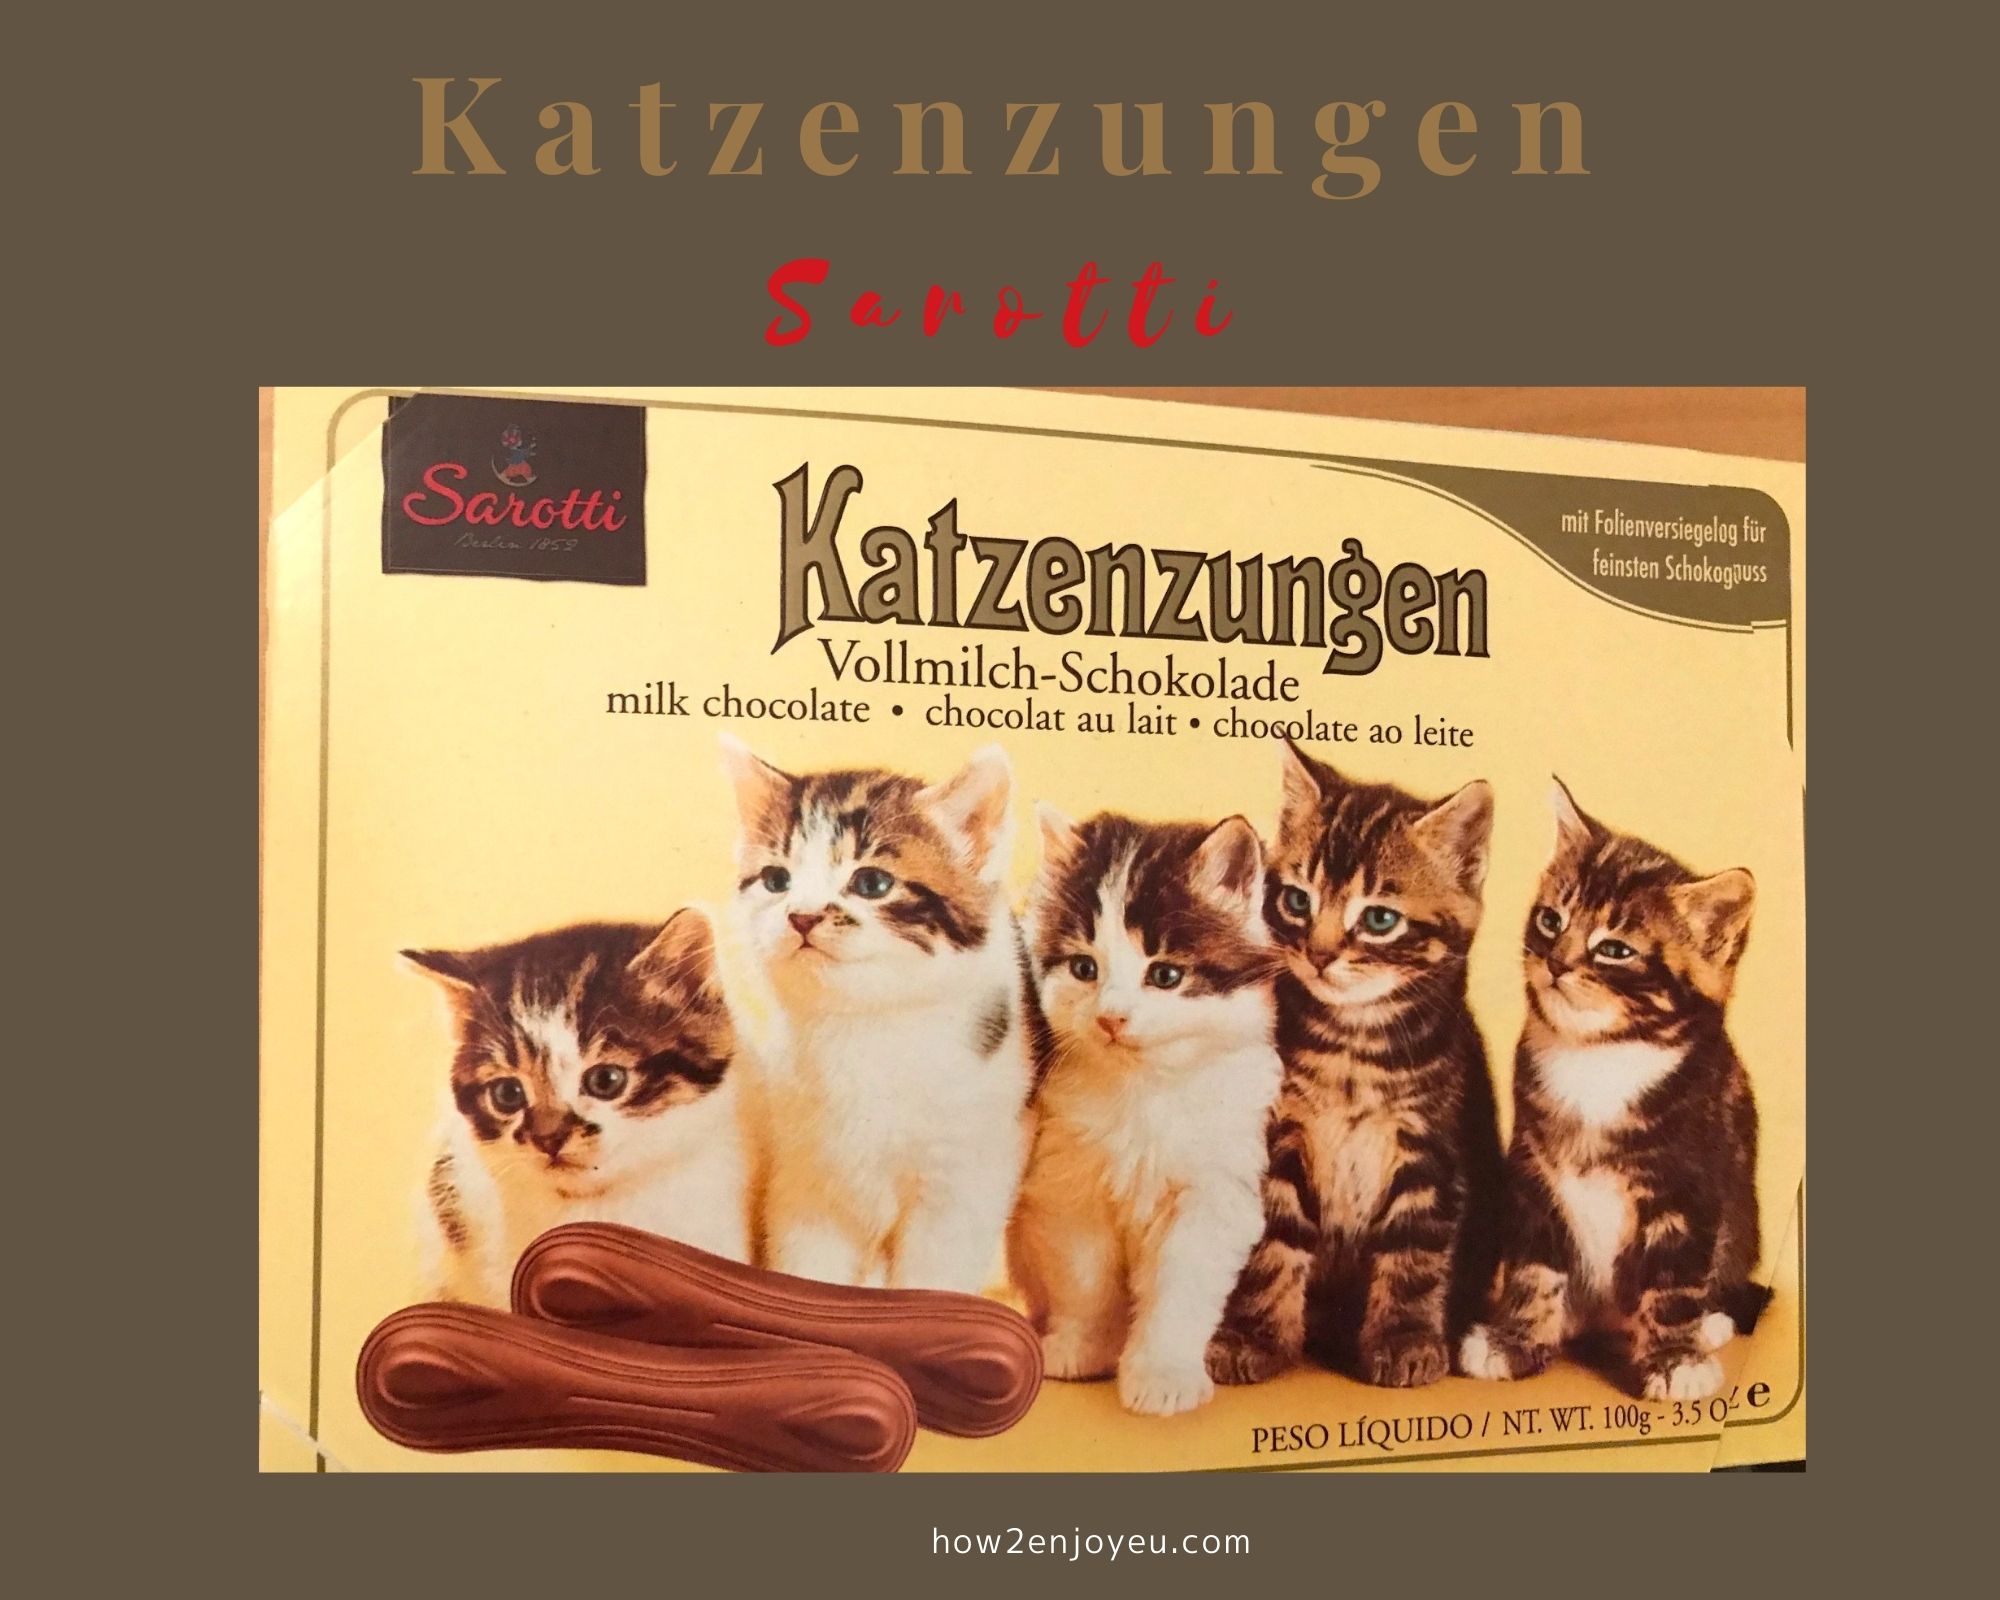 You are currently viewing Sarottiの猫の舌チョコ【Katzenzungen】はお値段以上